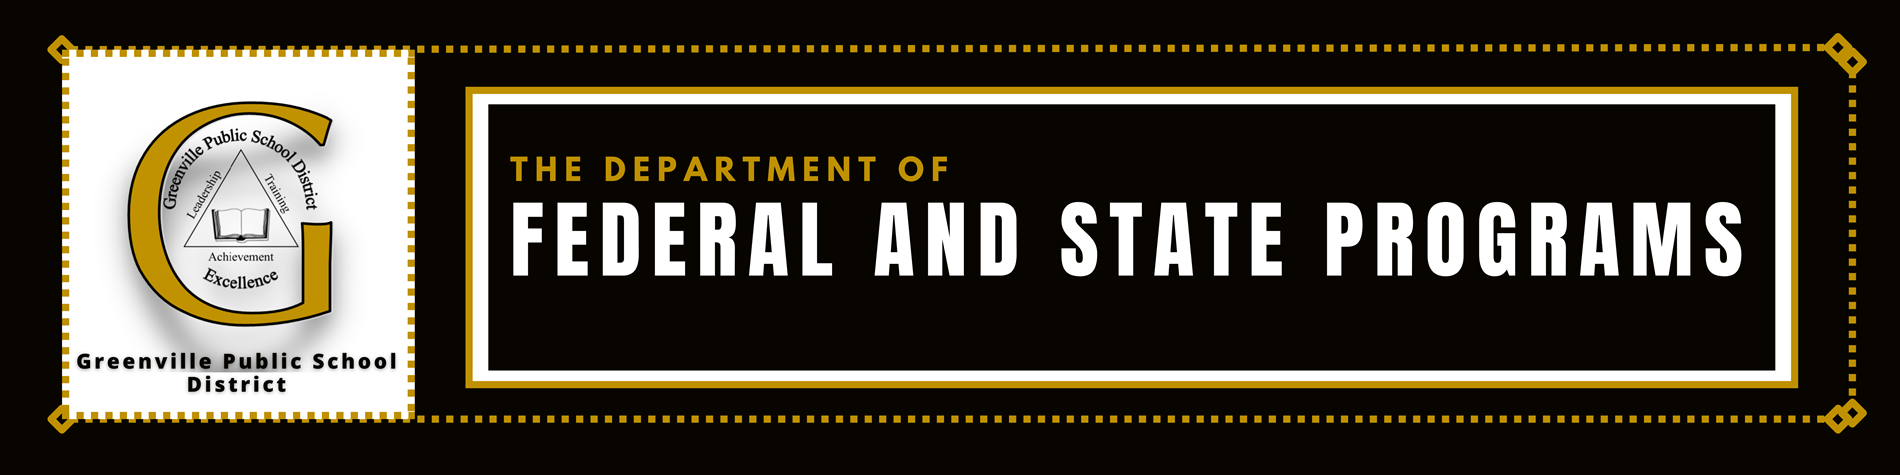 Federal and State Programs Banner